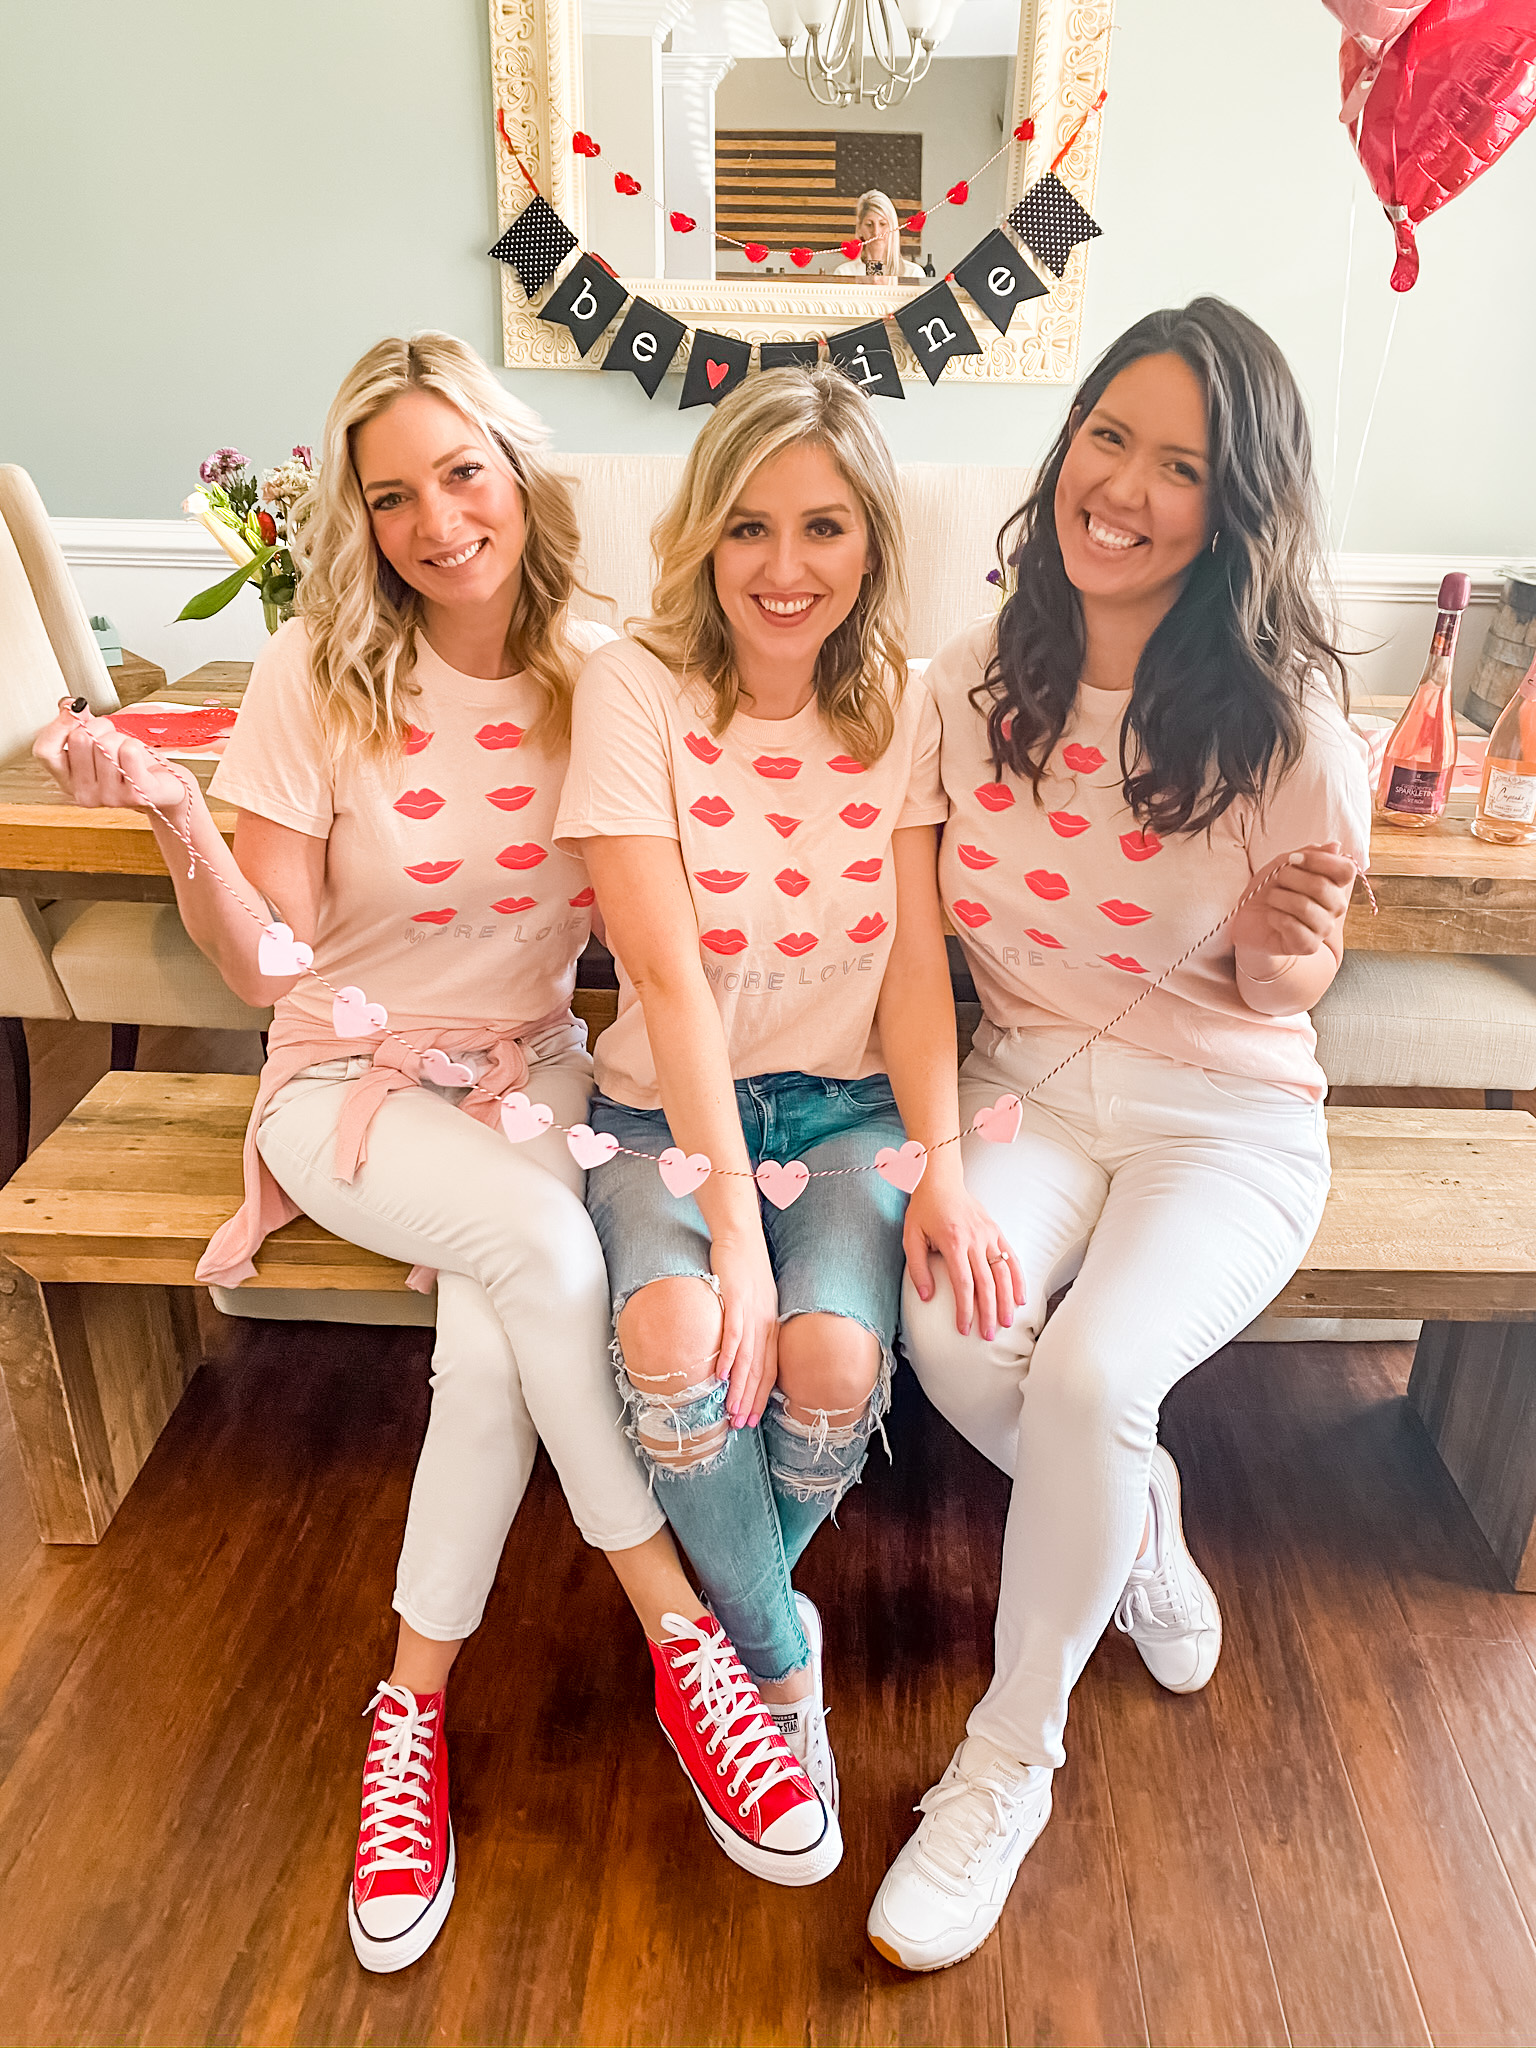 Throw the Cutest Galentines Party - Stacia Mikele